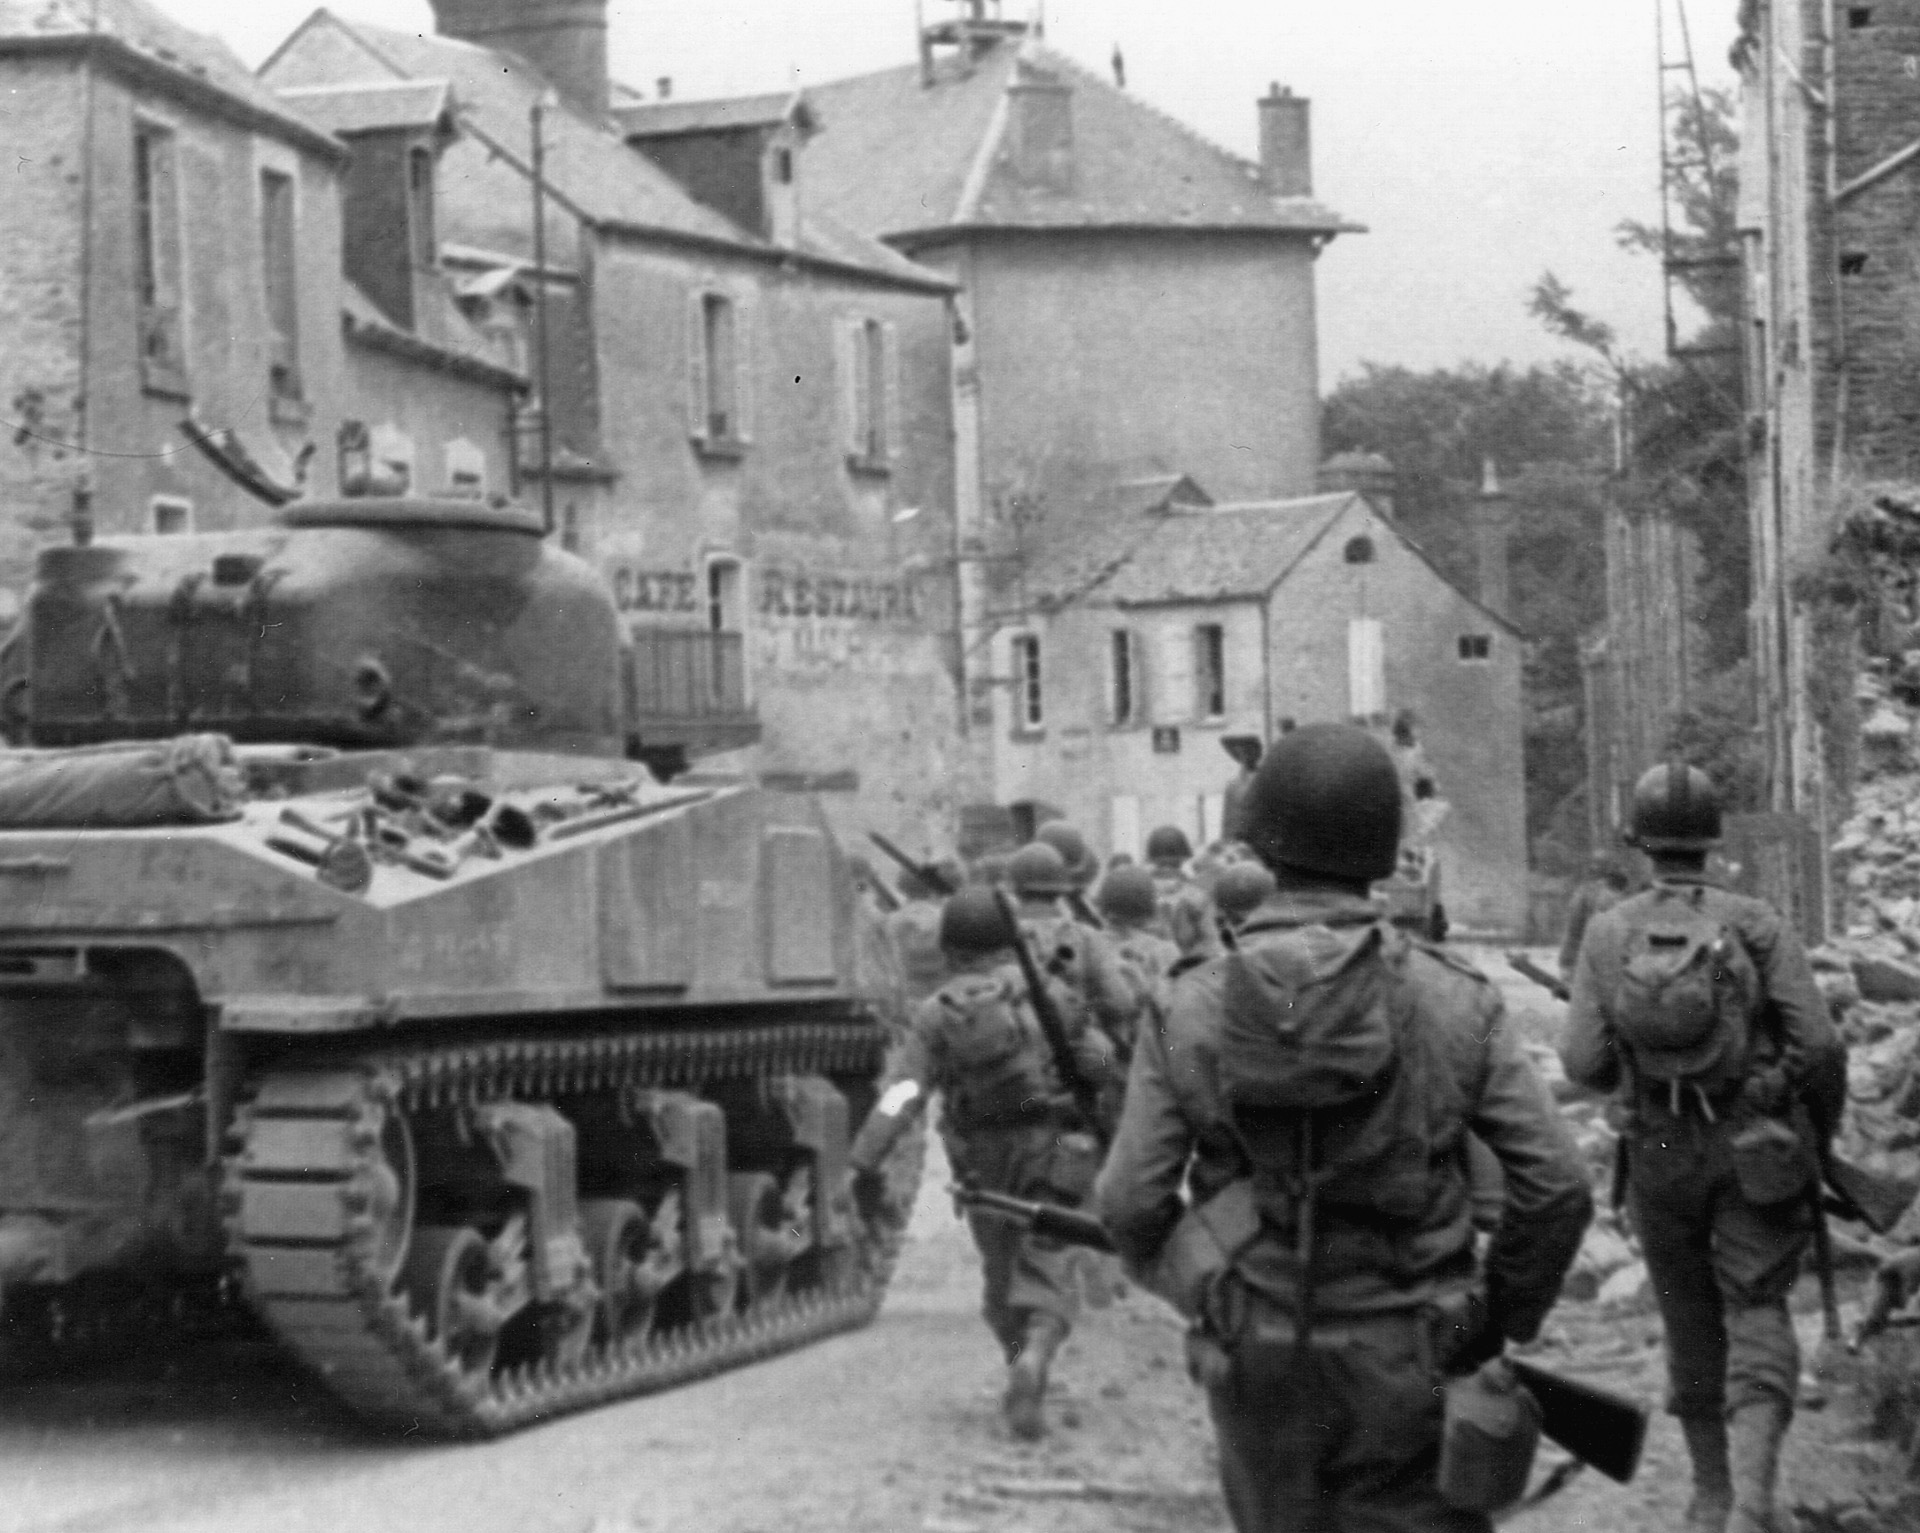 The 29th Infantry Division encountered heavy resistance as it moved down the main street of St. Lô.